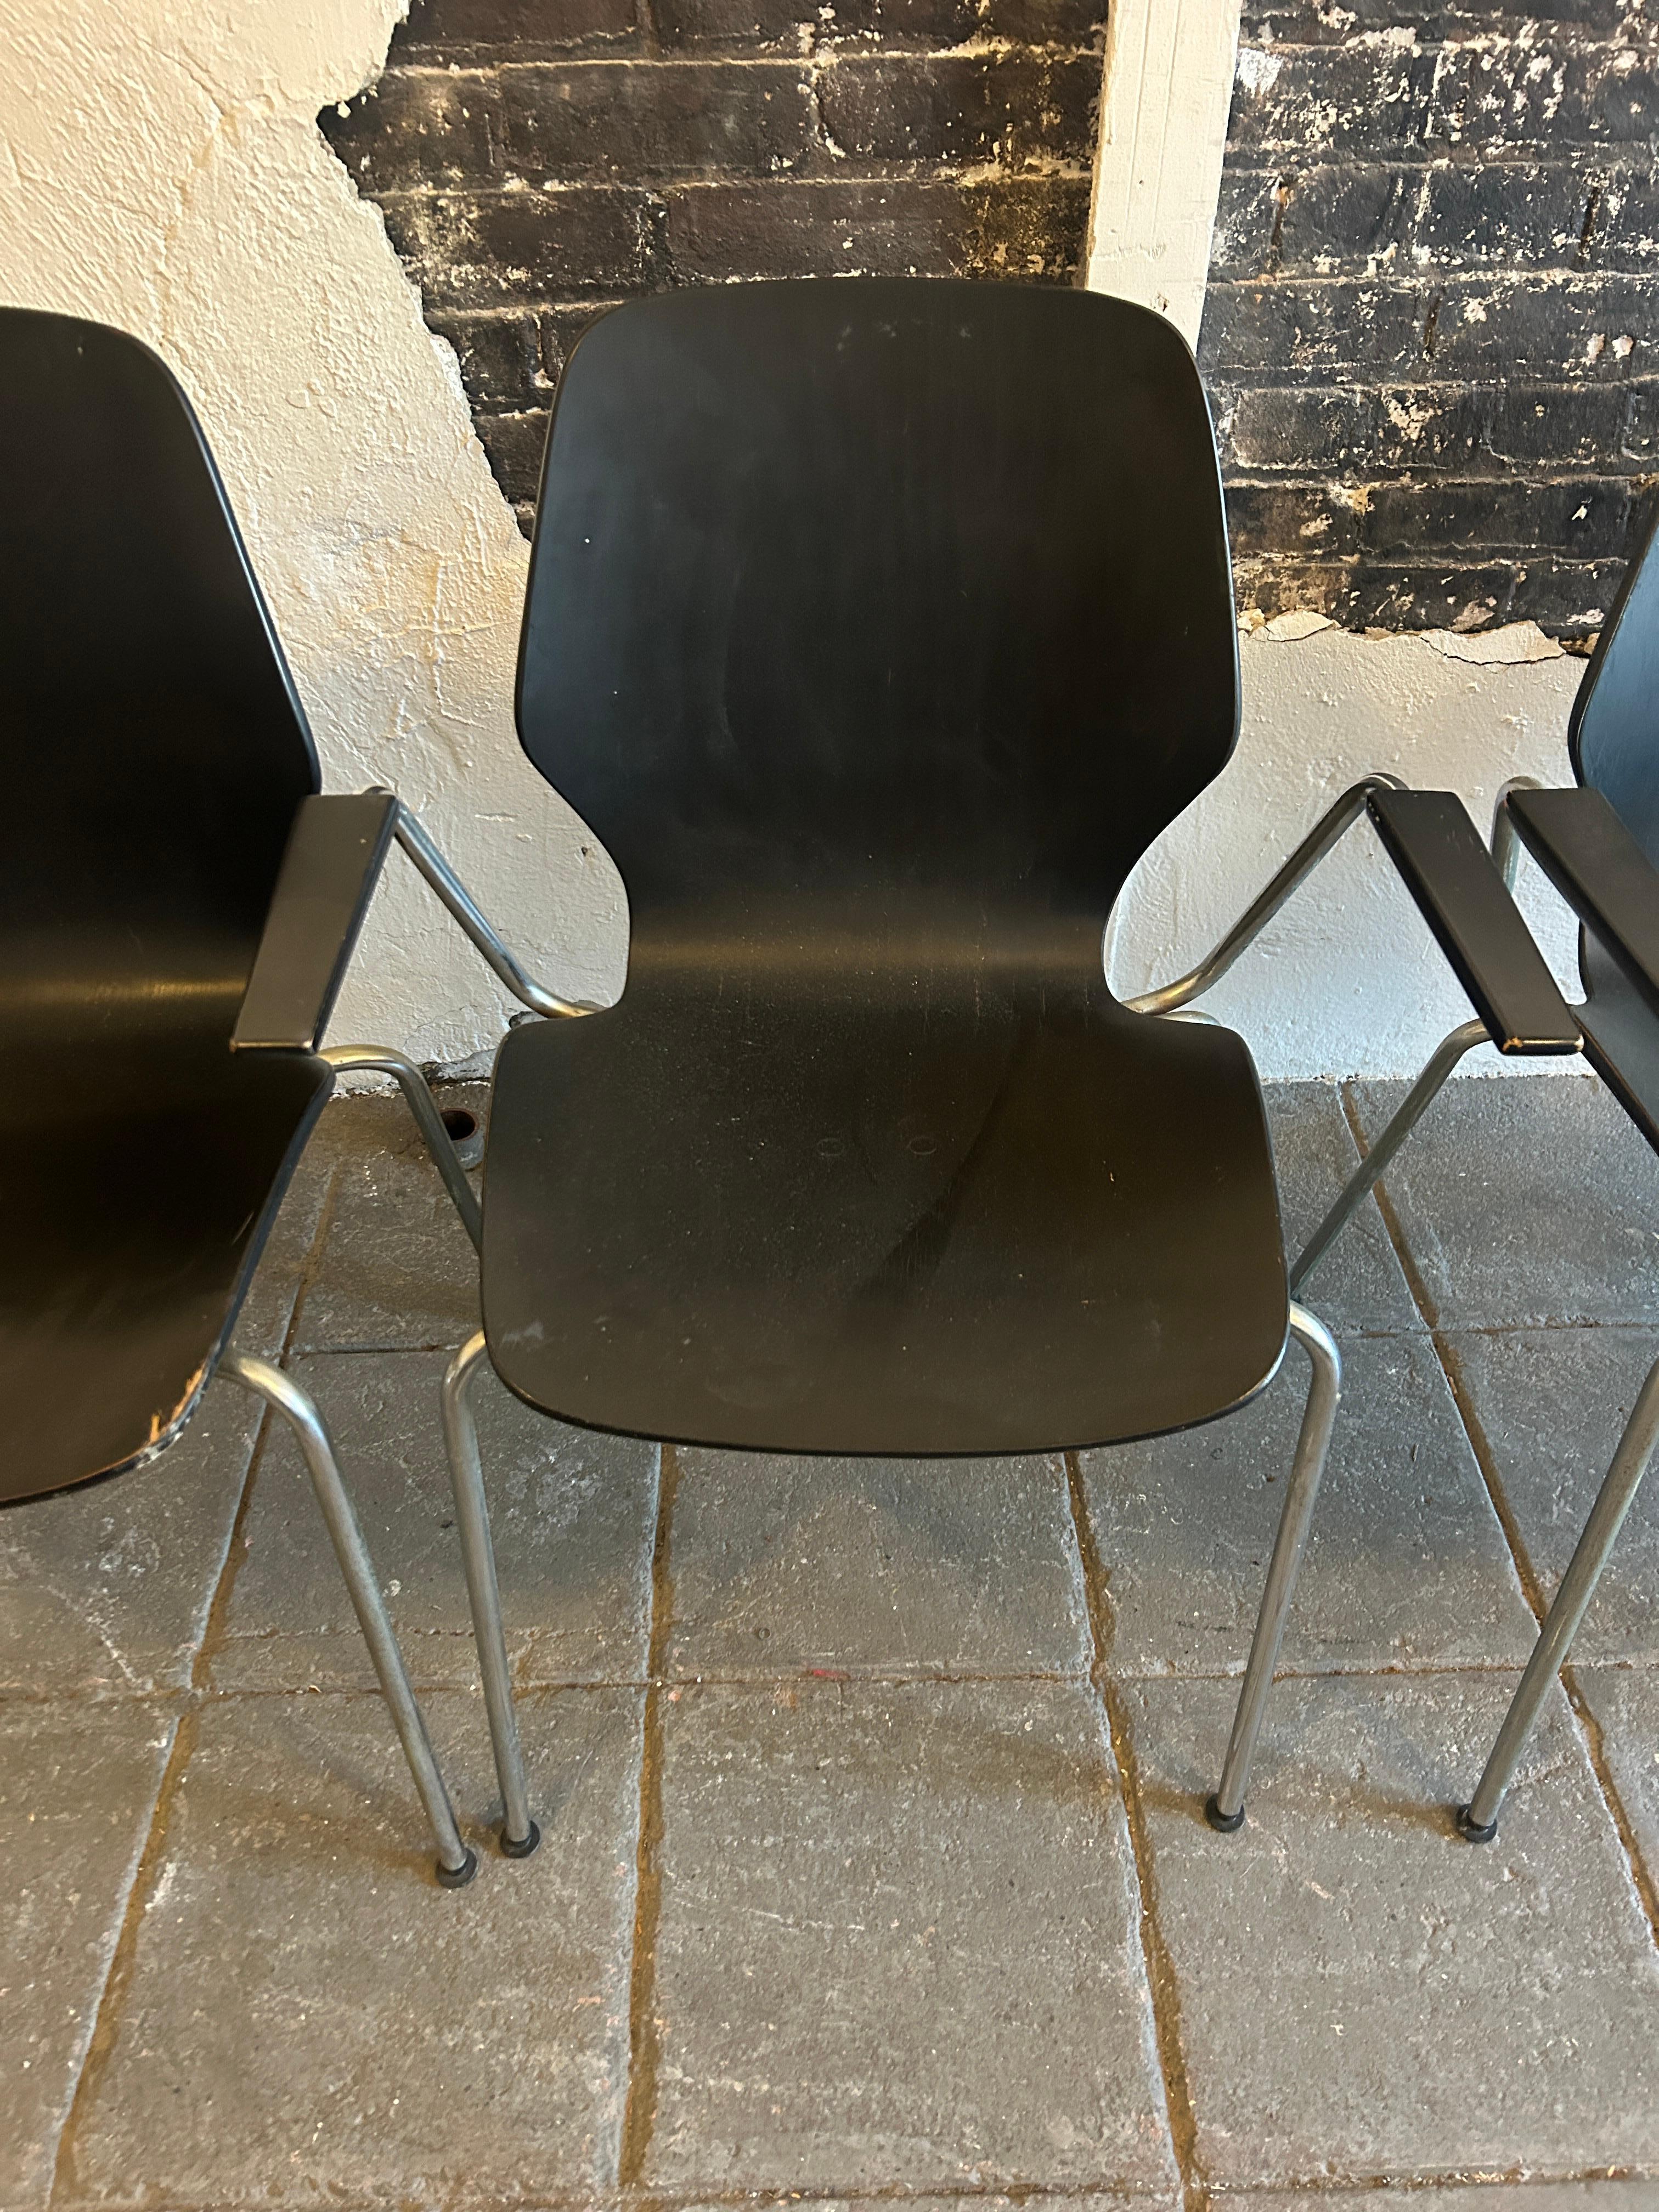 Set of 6 westnofa black Lacquer bentwood dining chairs made in Norway. Great all original set of bentwood Westnofa dining chairs that have zinc coated bent steel tube legs with black plastic feet caps. Two of the chairs are arm chairs with sculpted